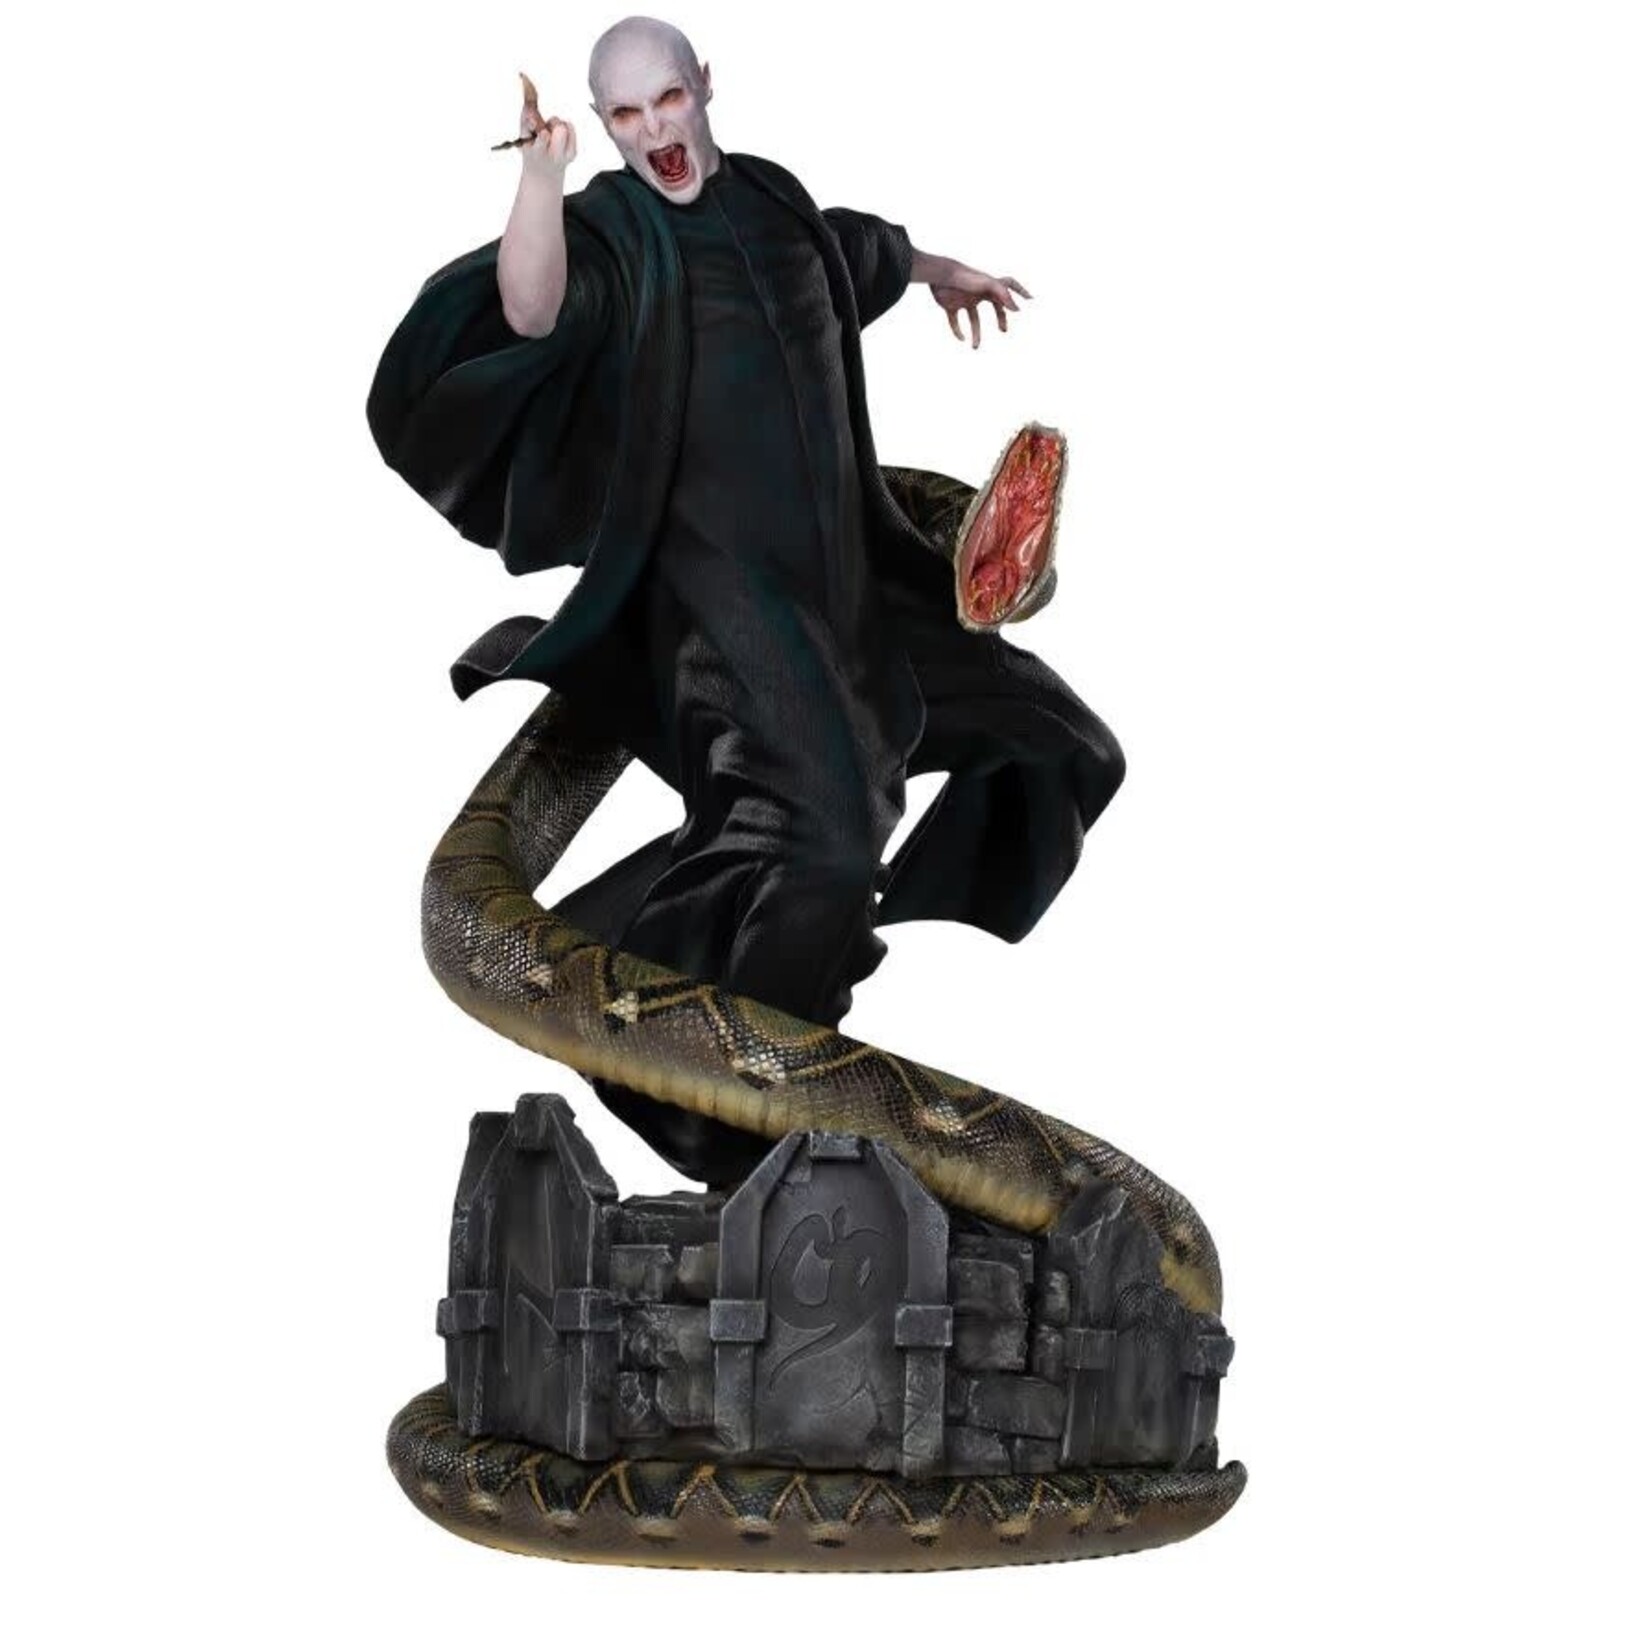 HARRY POTTER LORD VOLDEMORT STATUE IRON STUDIOS #401/500 CONSIGNMENT M.G